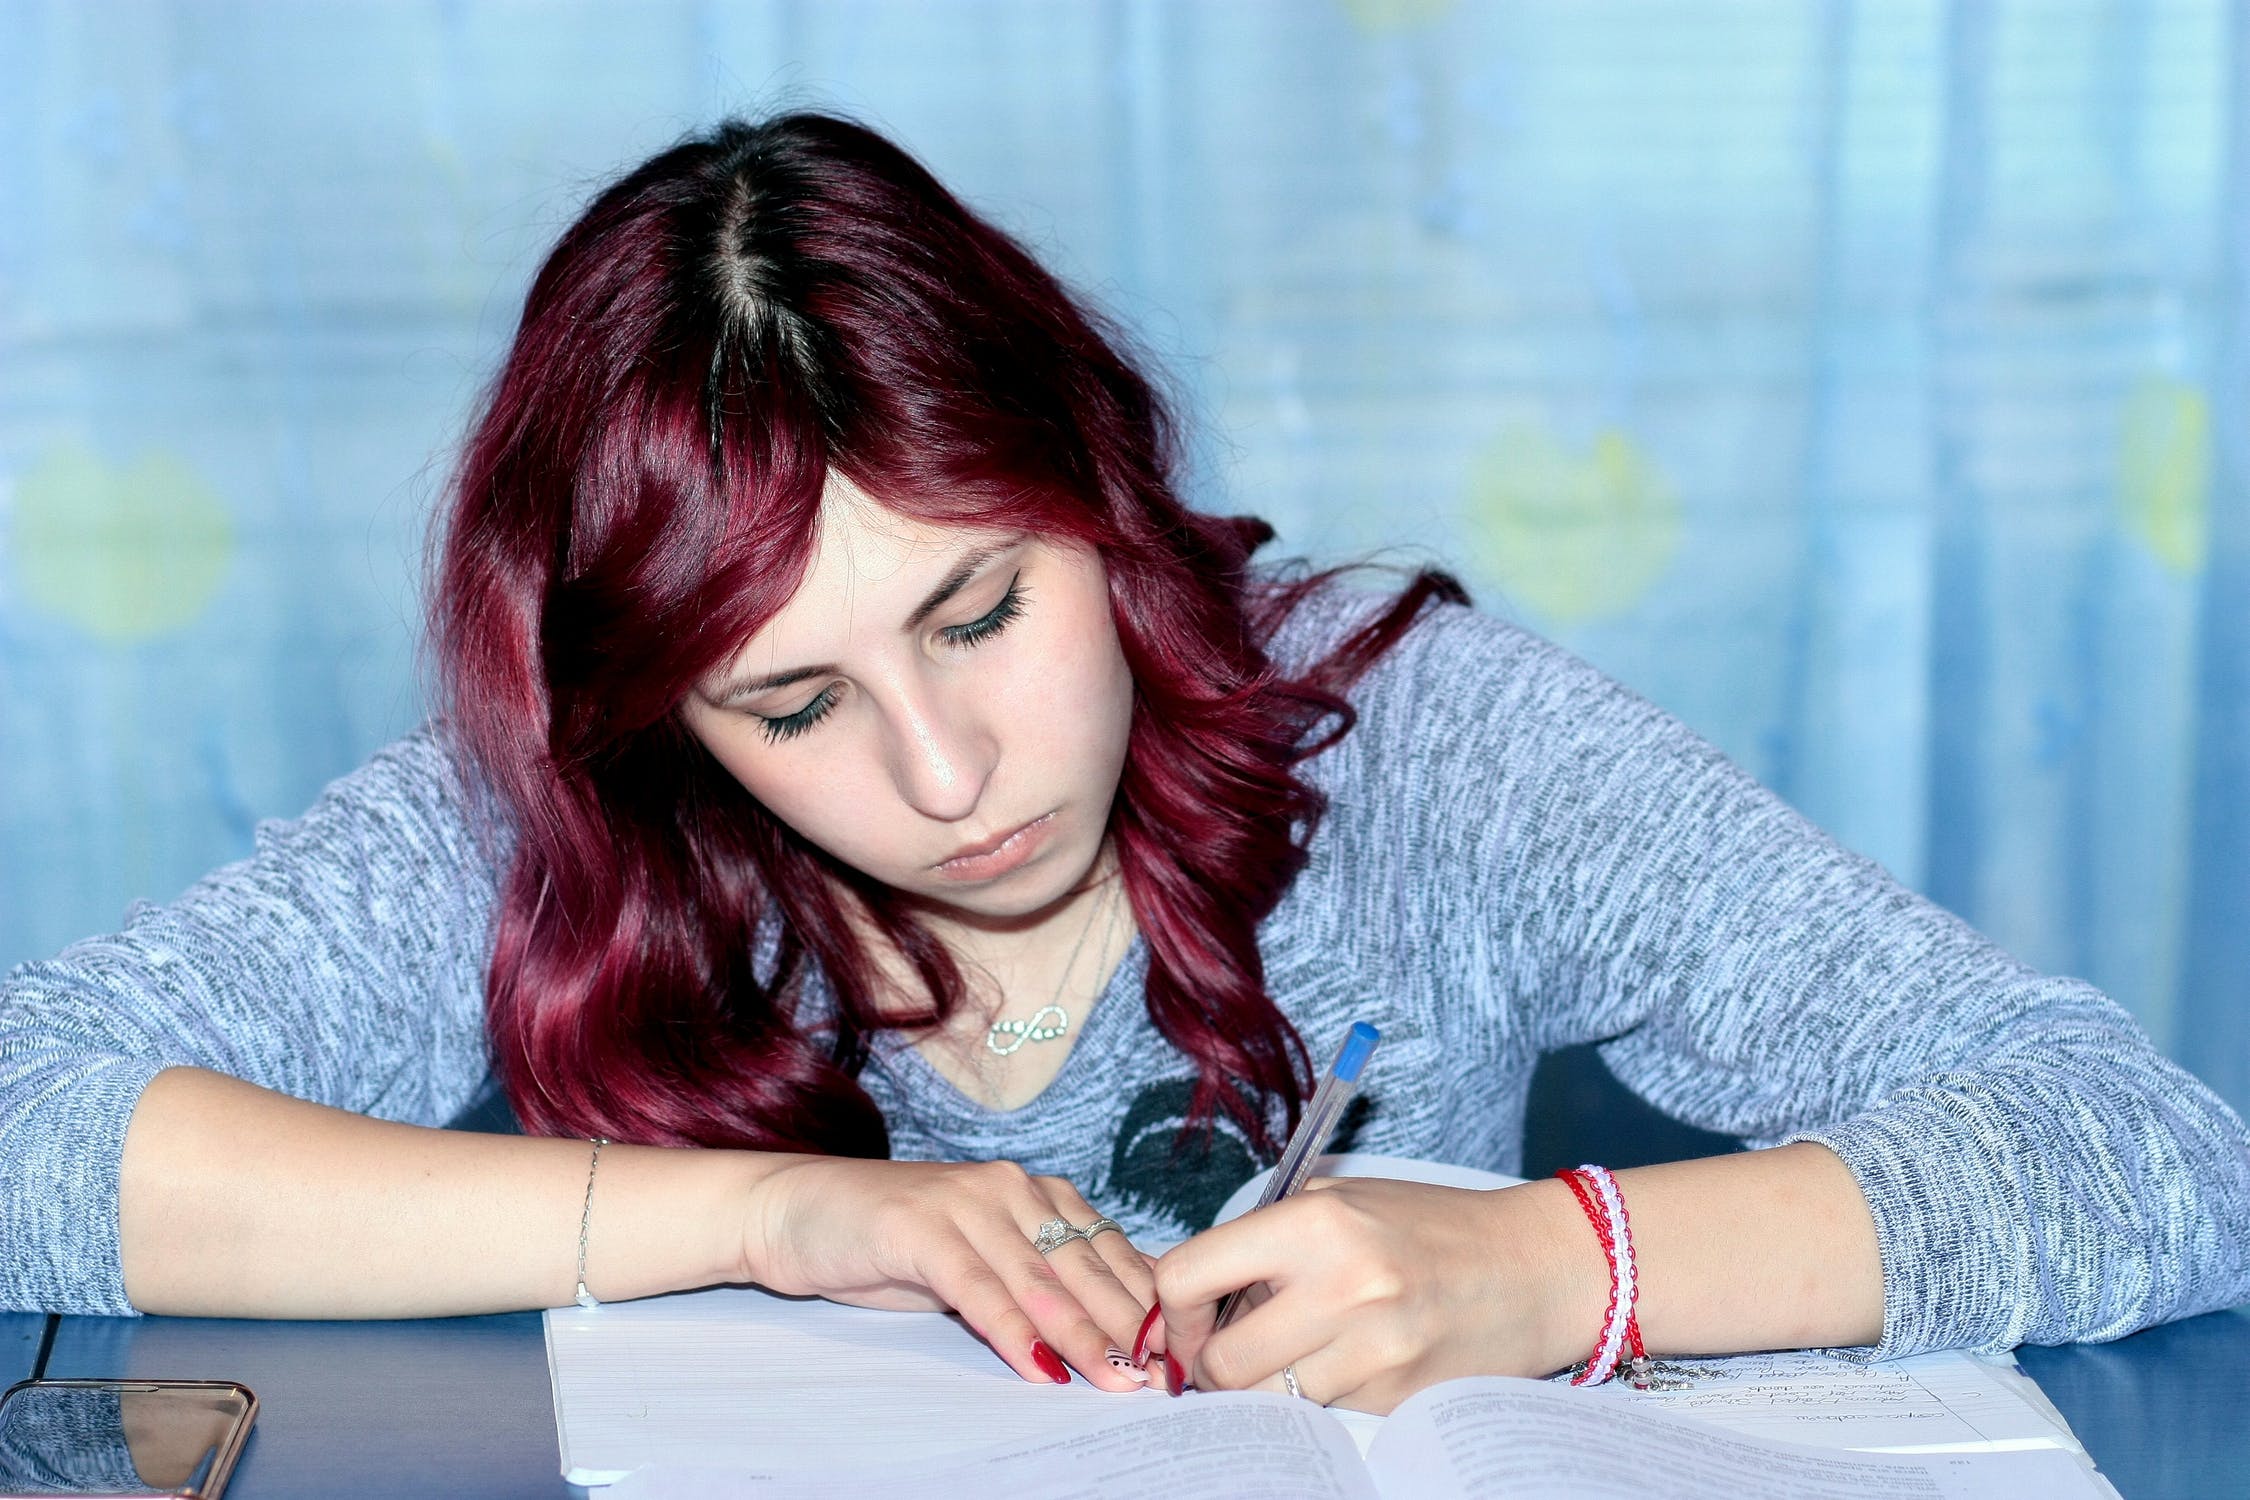 How to Tackle Your Nerve-Wracking Exams